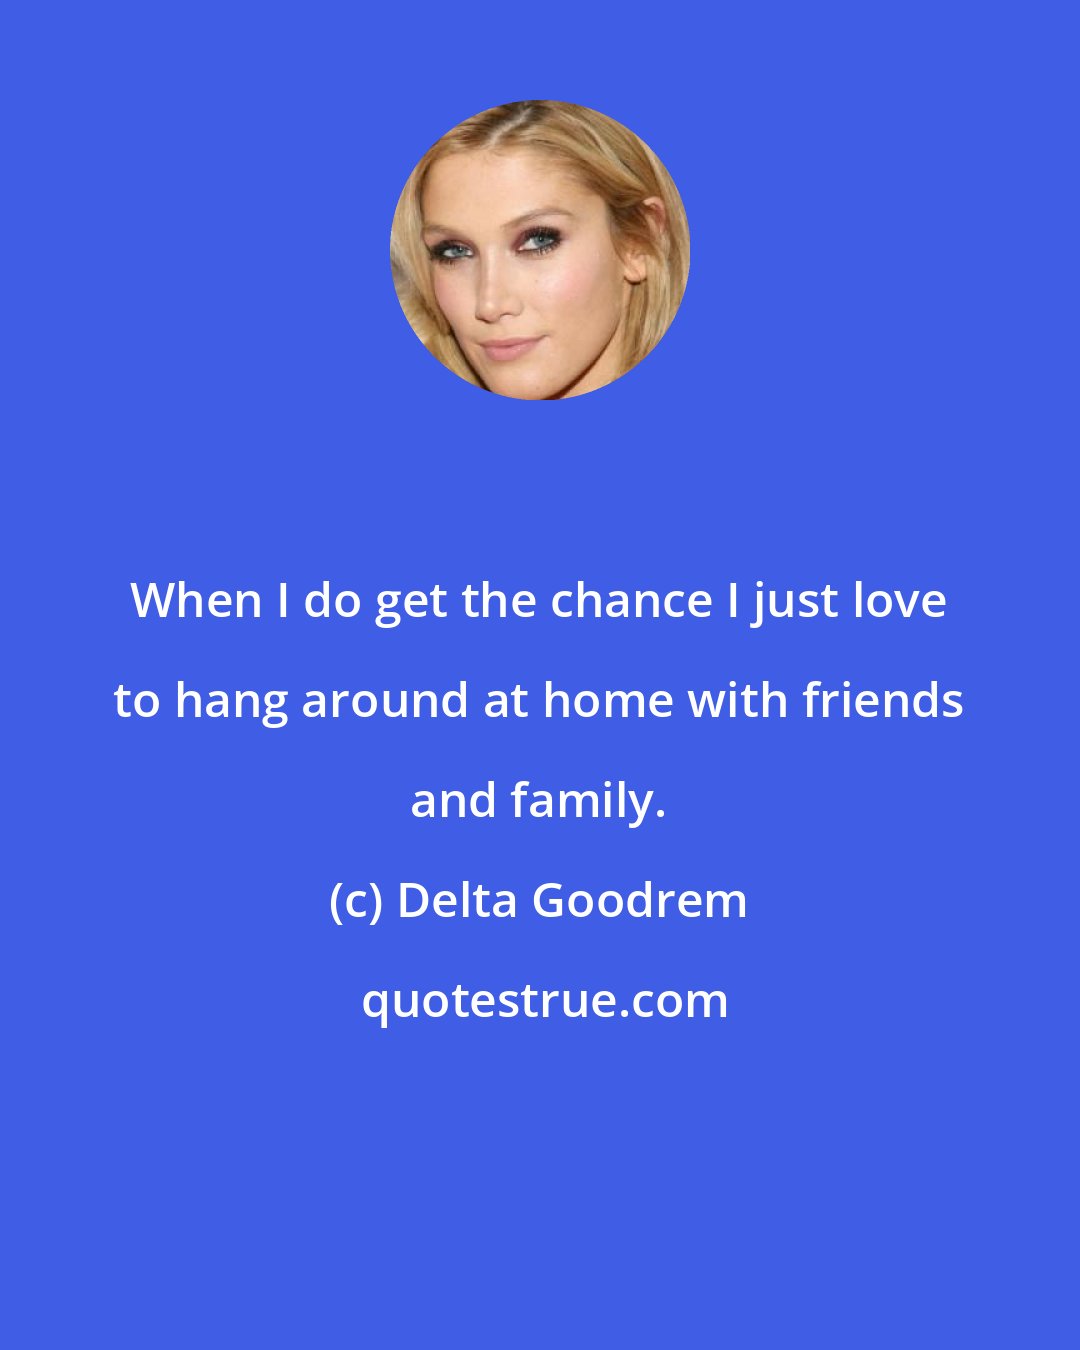 Delta Goodrem: When I do get the chance I just love to hang around at home with friends and family.